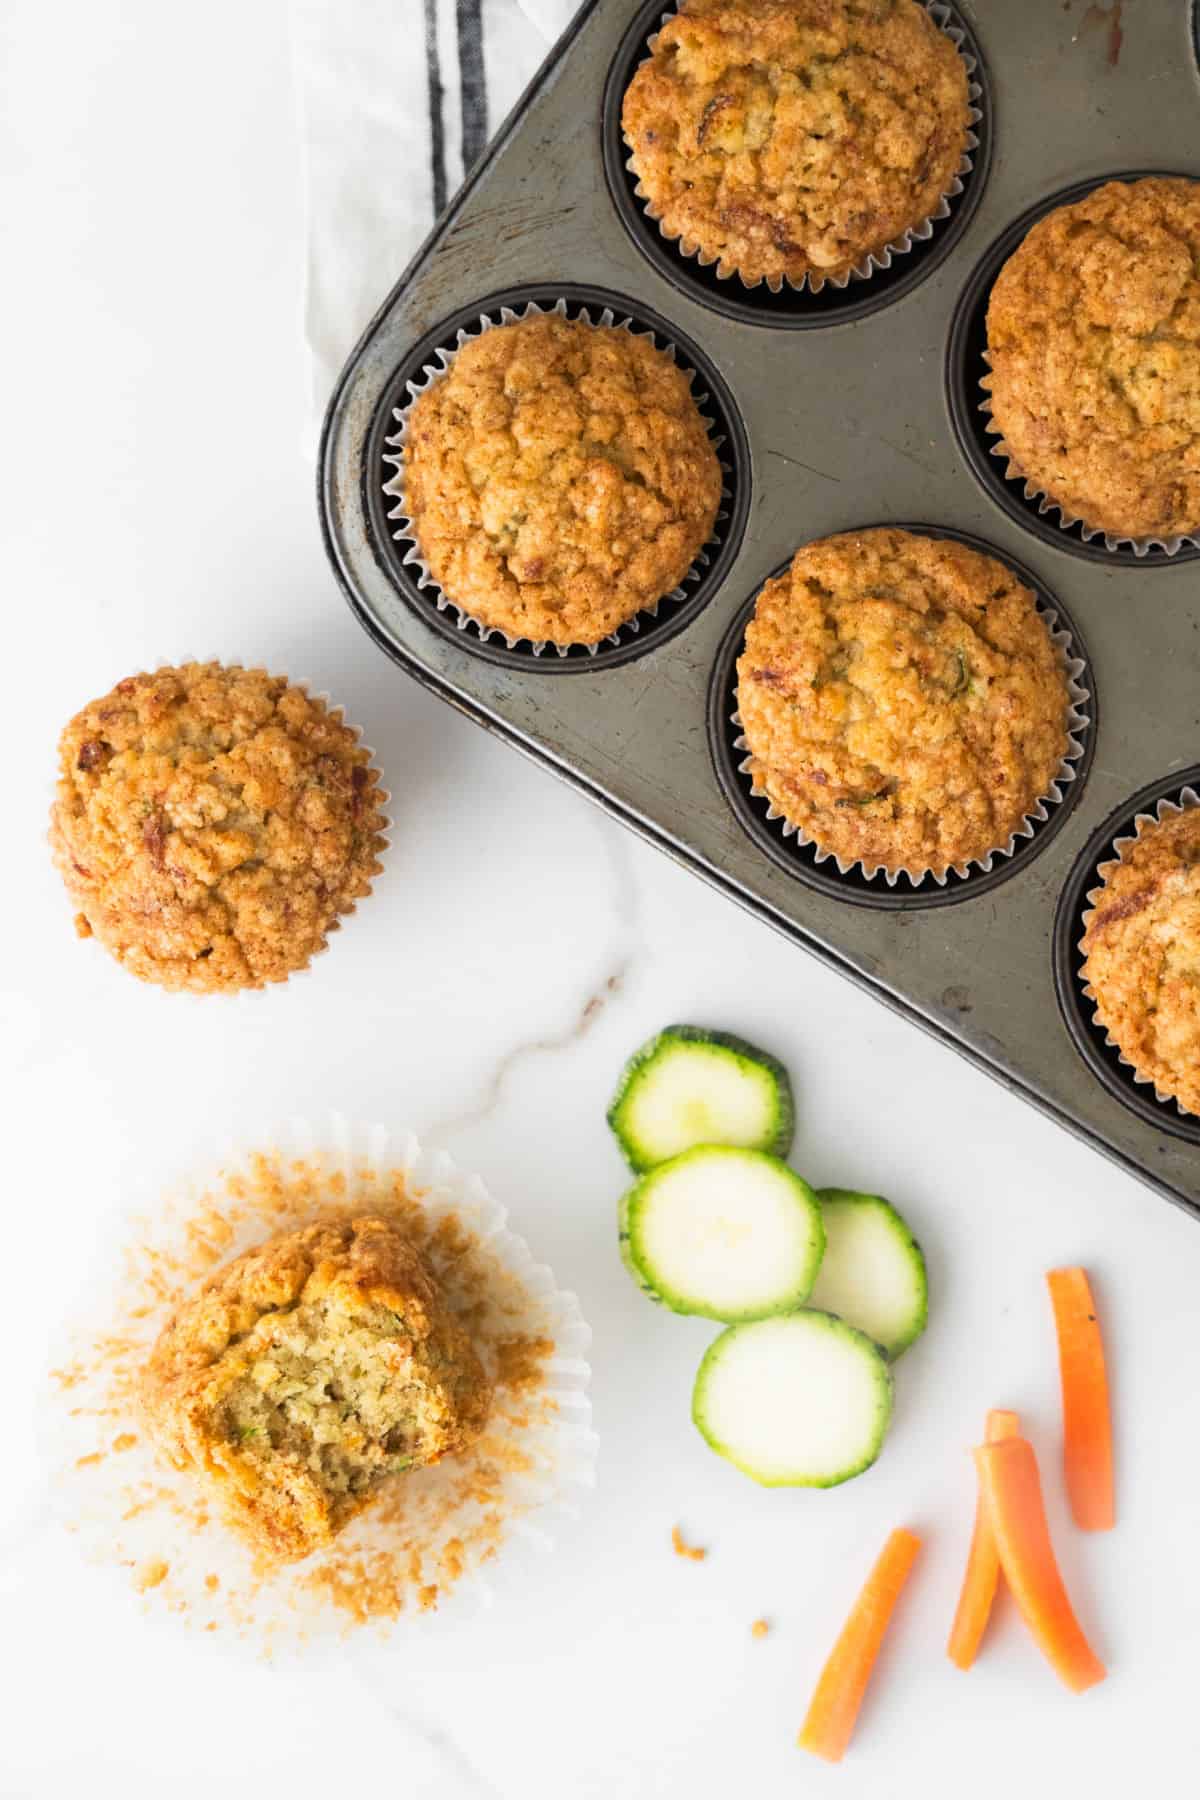 Top view of muffin pan with baked zucchini carrot muffins. White marble, zucchini and carrot slices, half a muffin.